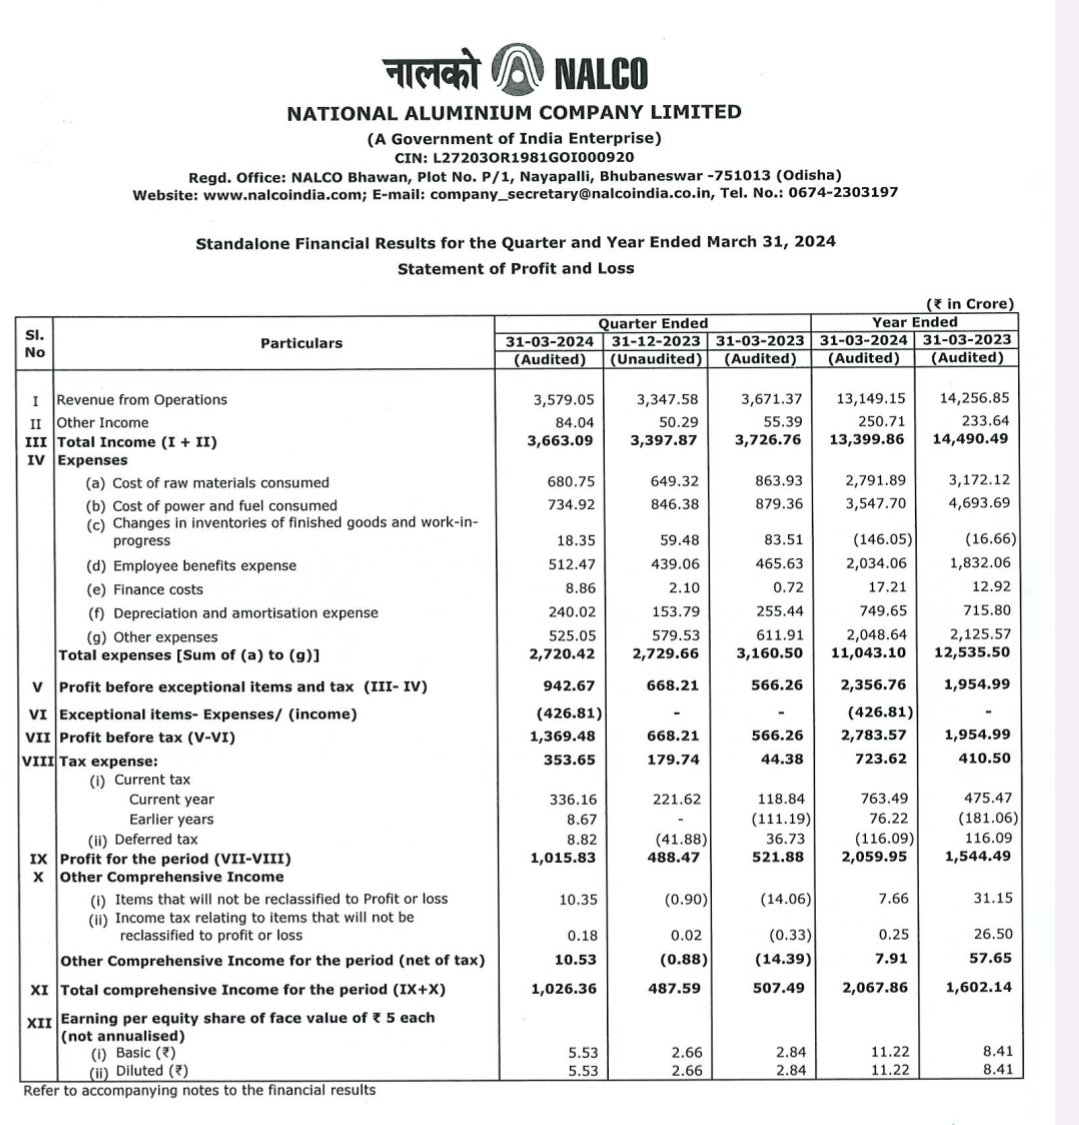 National Aluminium Company Ltd - Out of the Park Results 🔥 

⚡Net Profit Breaks 4 Digit Mark 
⚡Highest Ever EPS at 5.53 vs 2.66 Last Quarter and 2.83 Last Year
⚡Massive Margin Expansion

This is a Multibagger in Making 🤞🏻 - Don't be Surprised to See 400 Levels Here 🐂

#NALCO